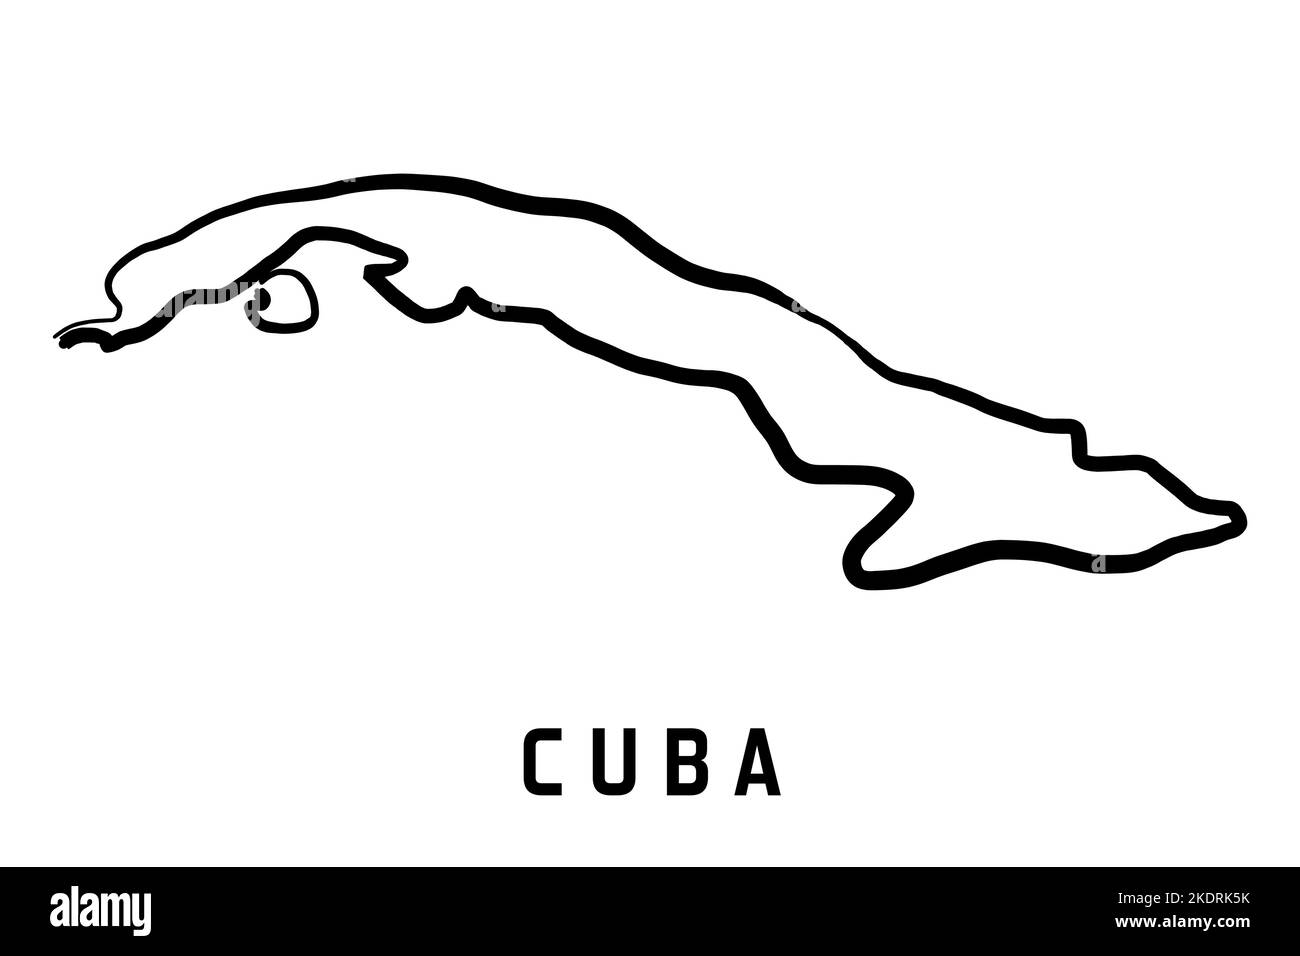 Cuba Island Map Simple Outline Vector Hand Drawn Simplified Style Map 2KDRK5K 